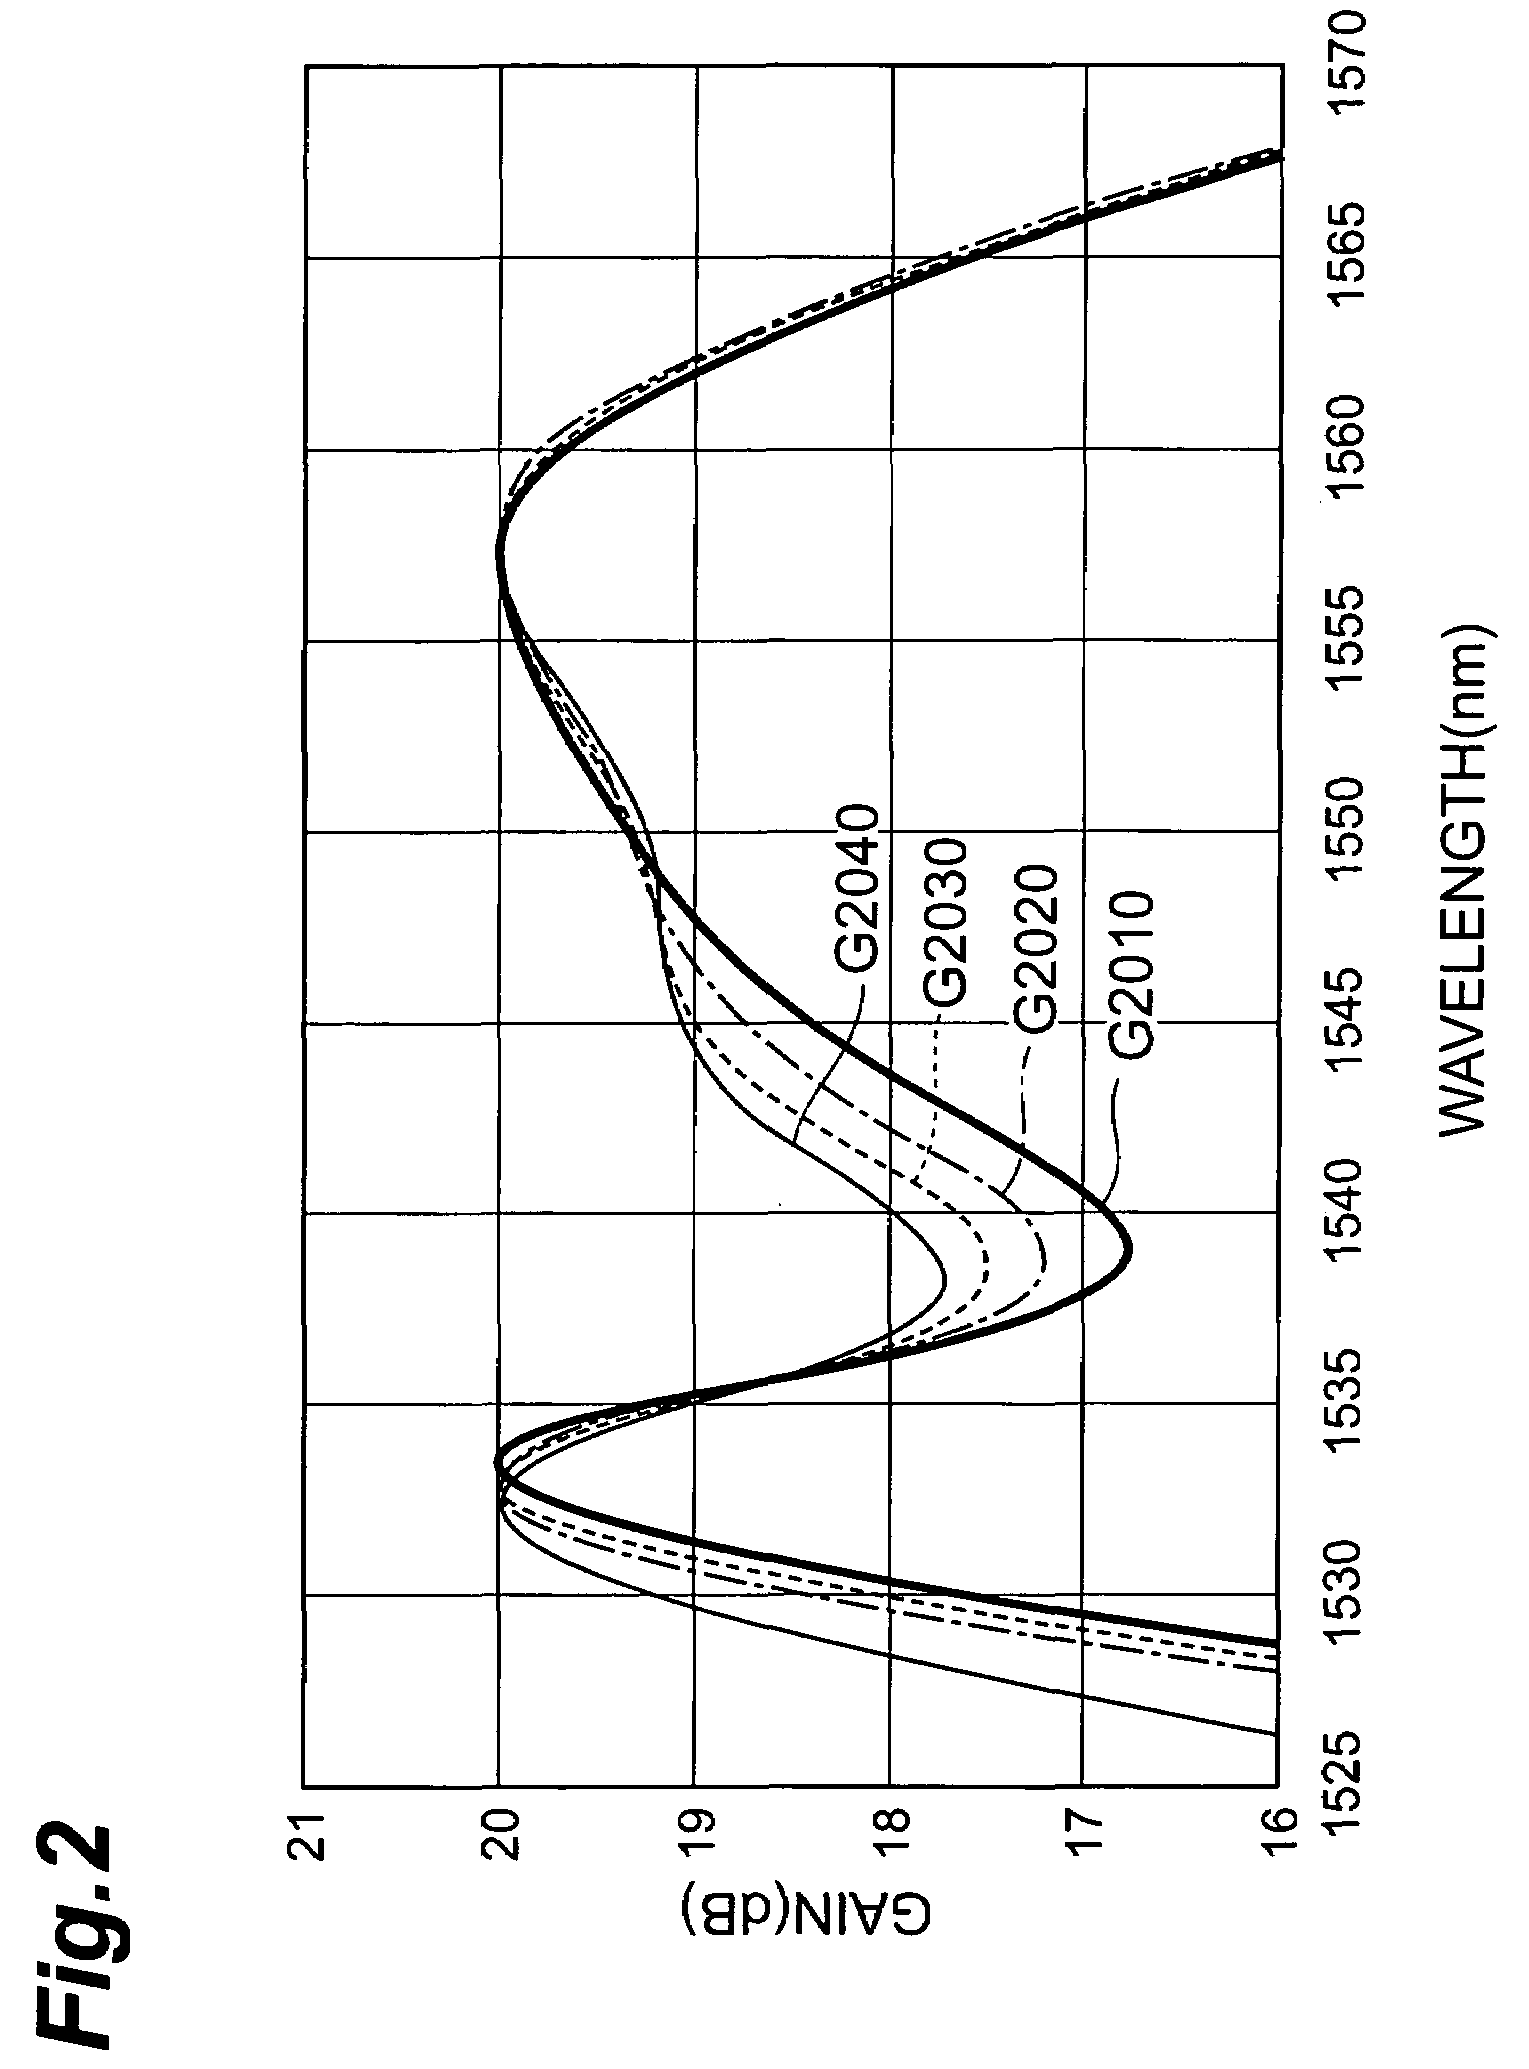 Optical amplification module, optical amplification apparatus, and optical communications system